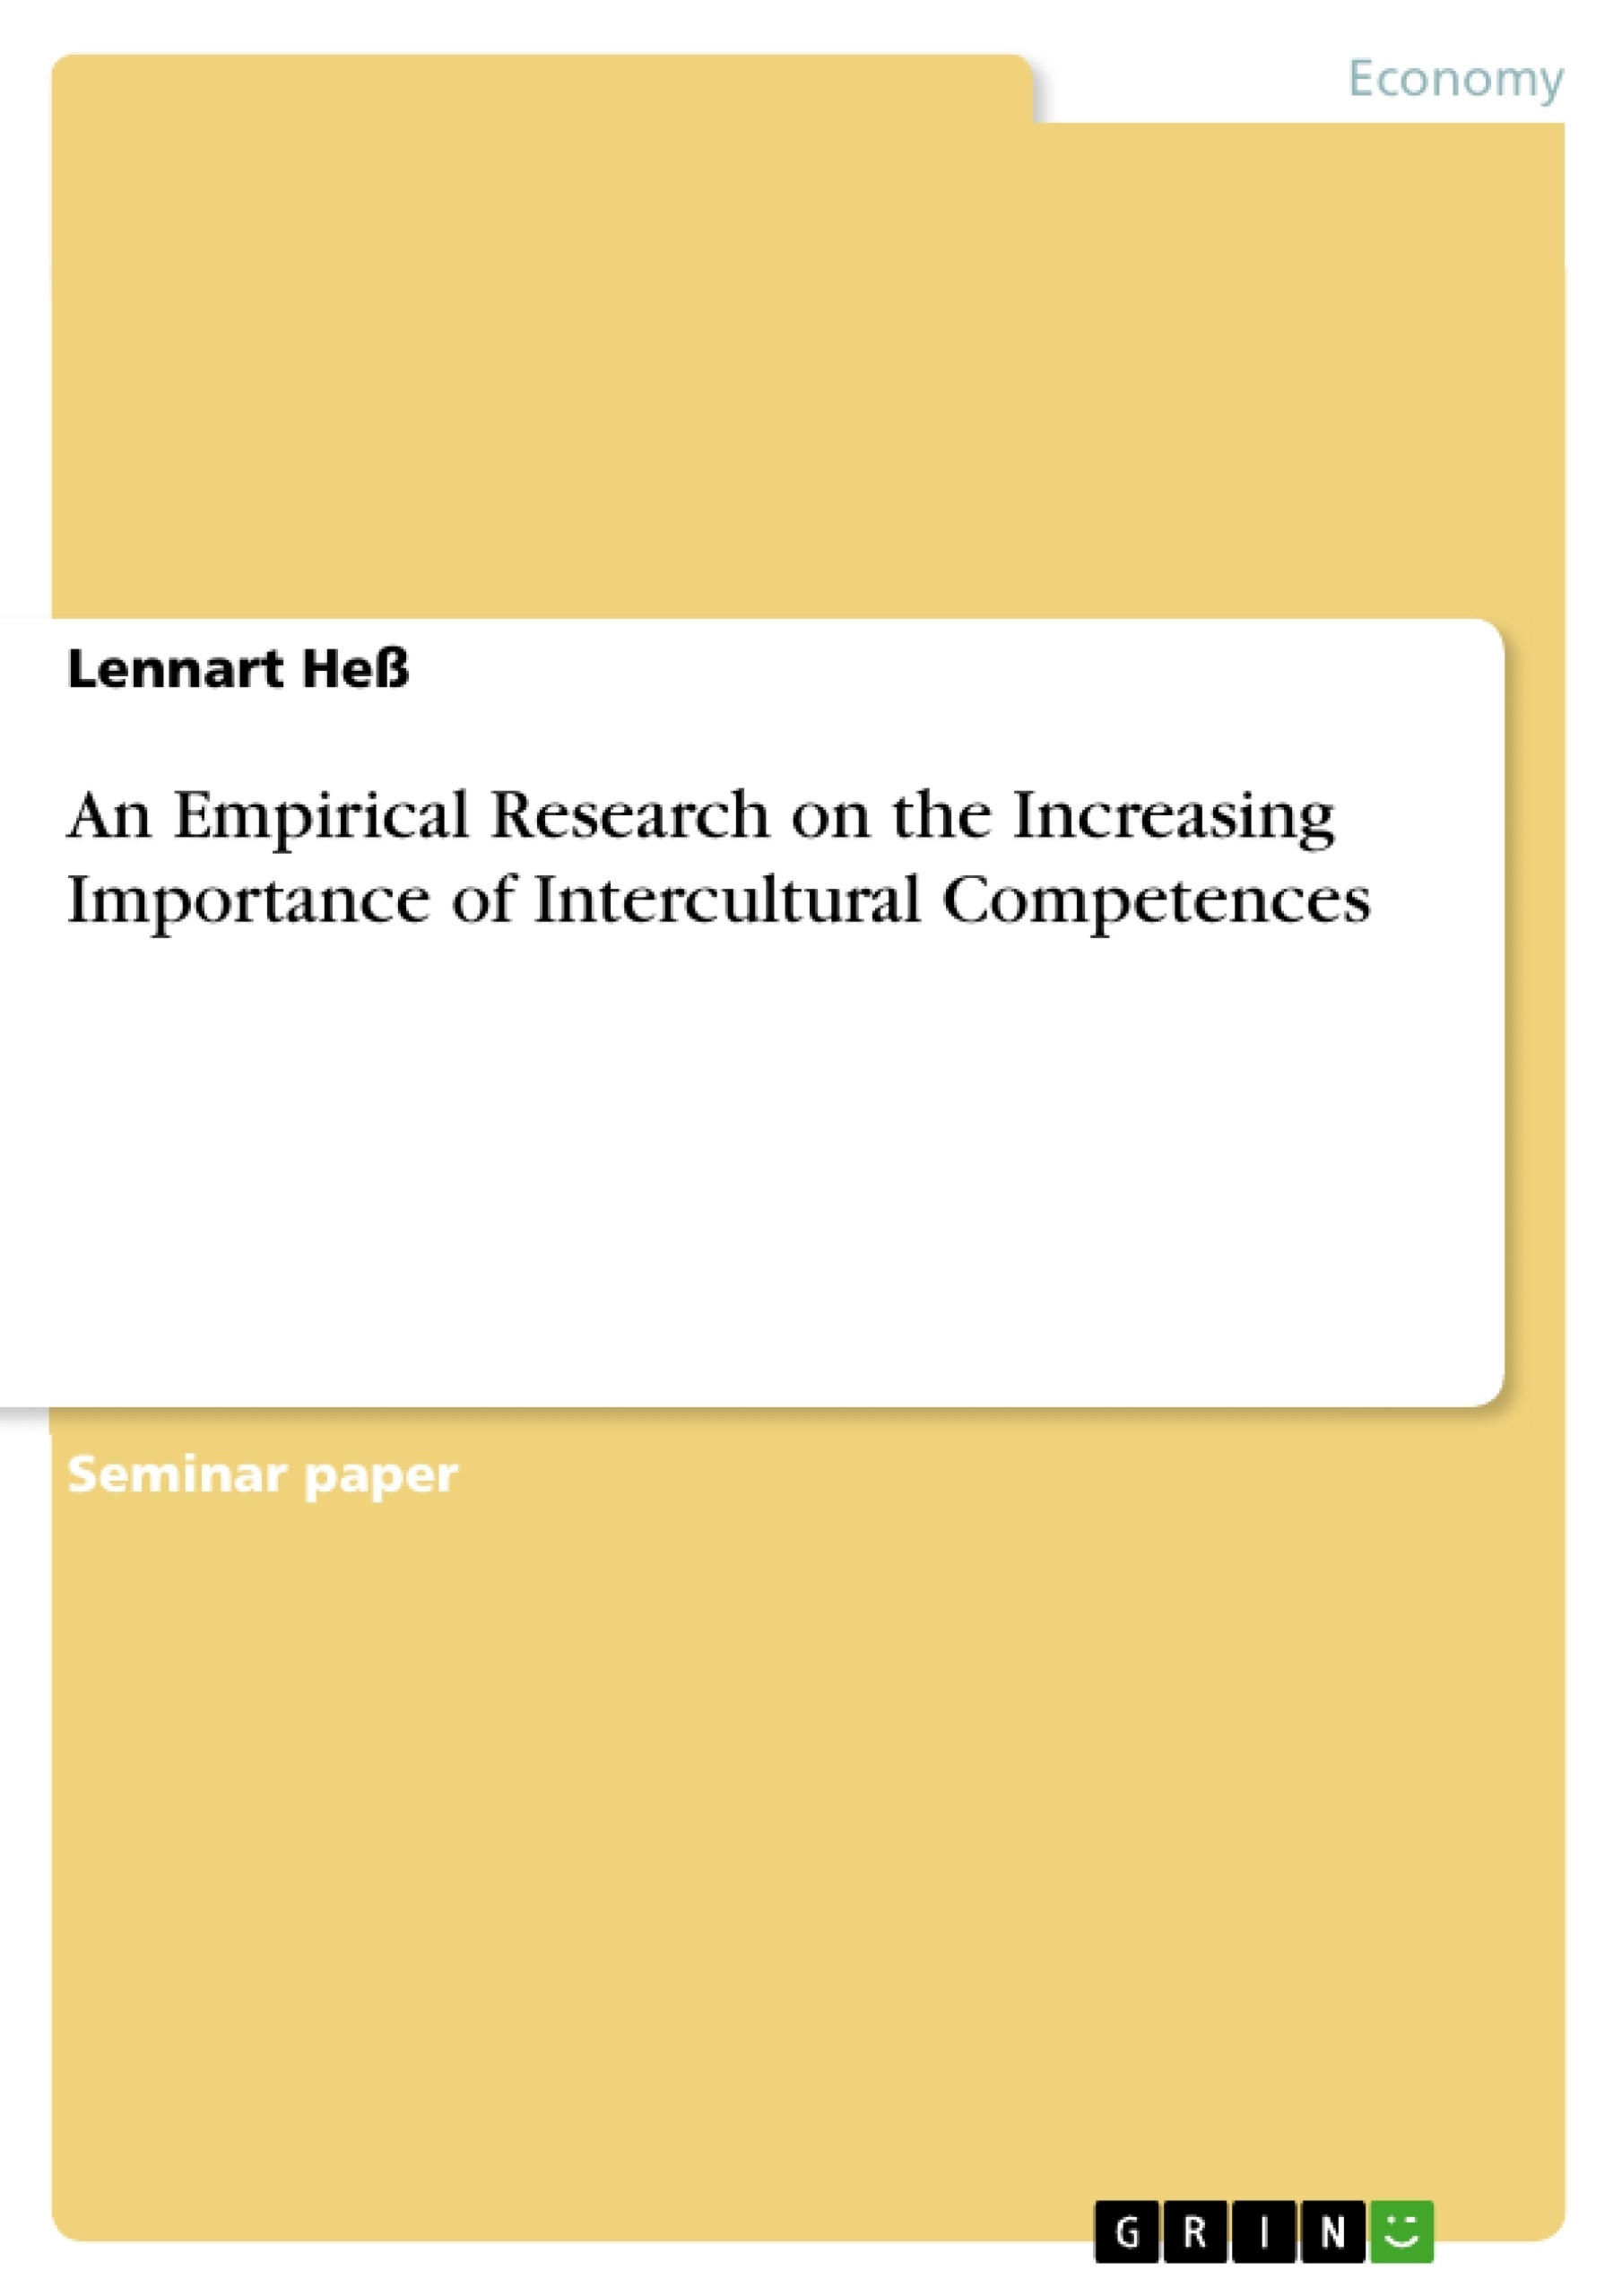 Título: An Empirical Research on the Increasing Importance of Intercultural Competences